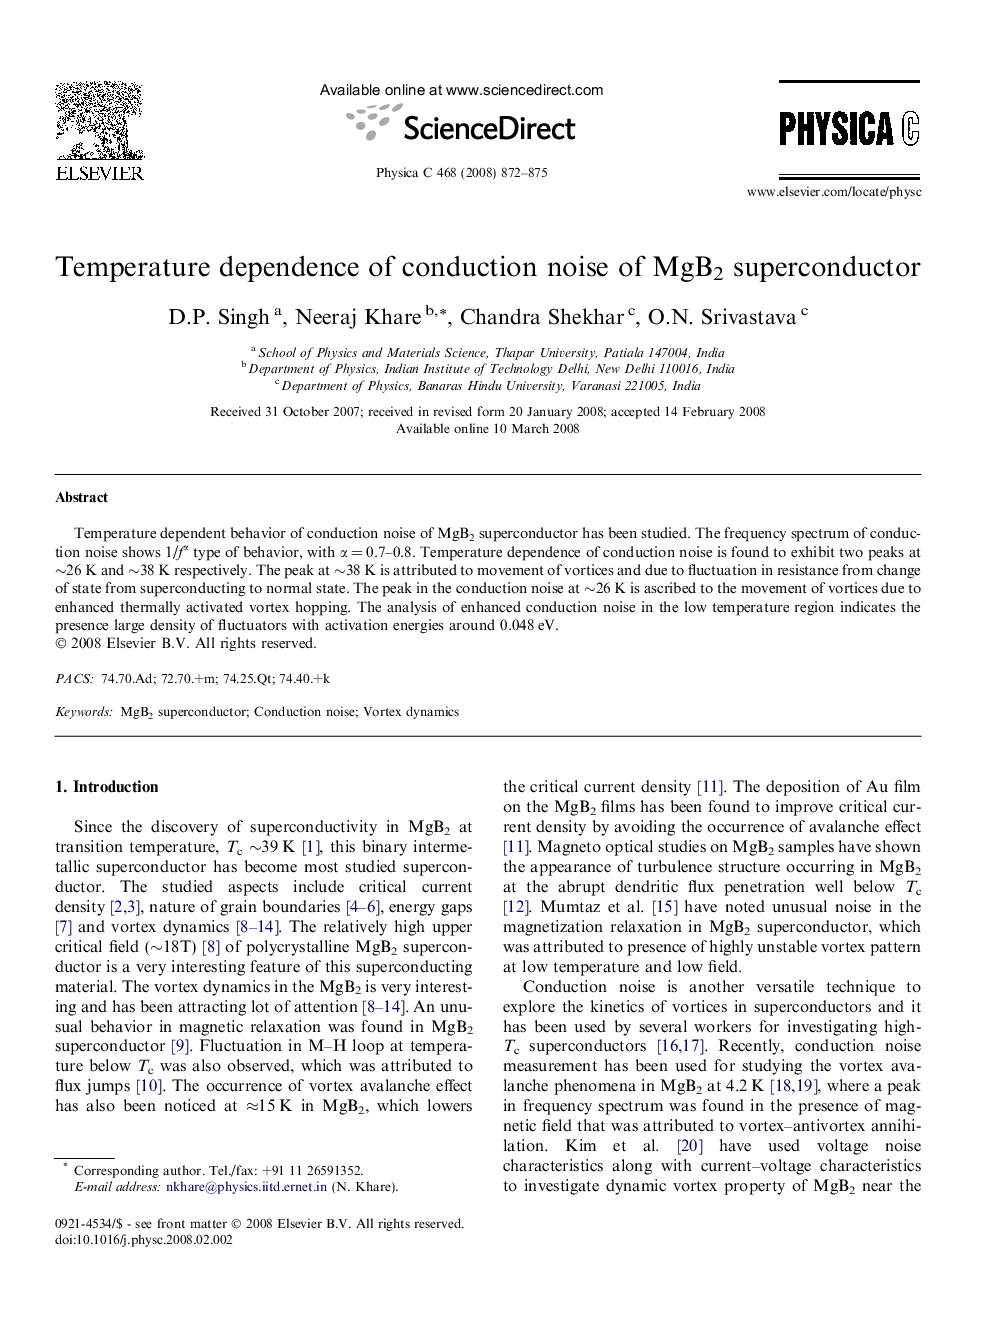 Temperature dependence of conduction noise of MgB2 superconductor